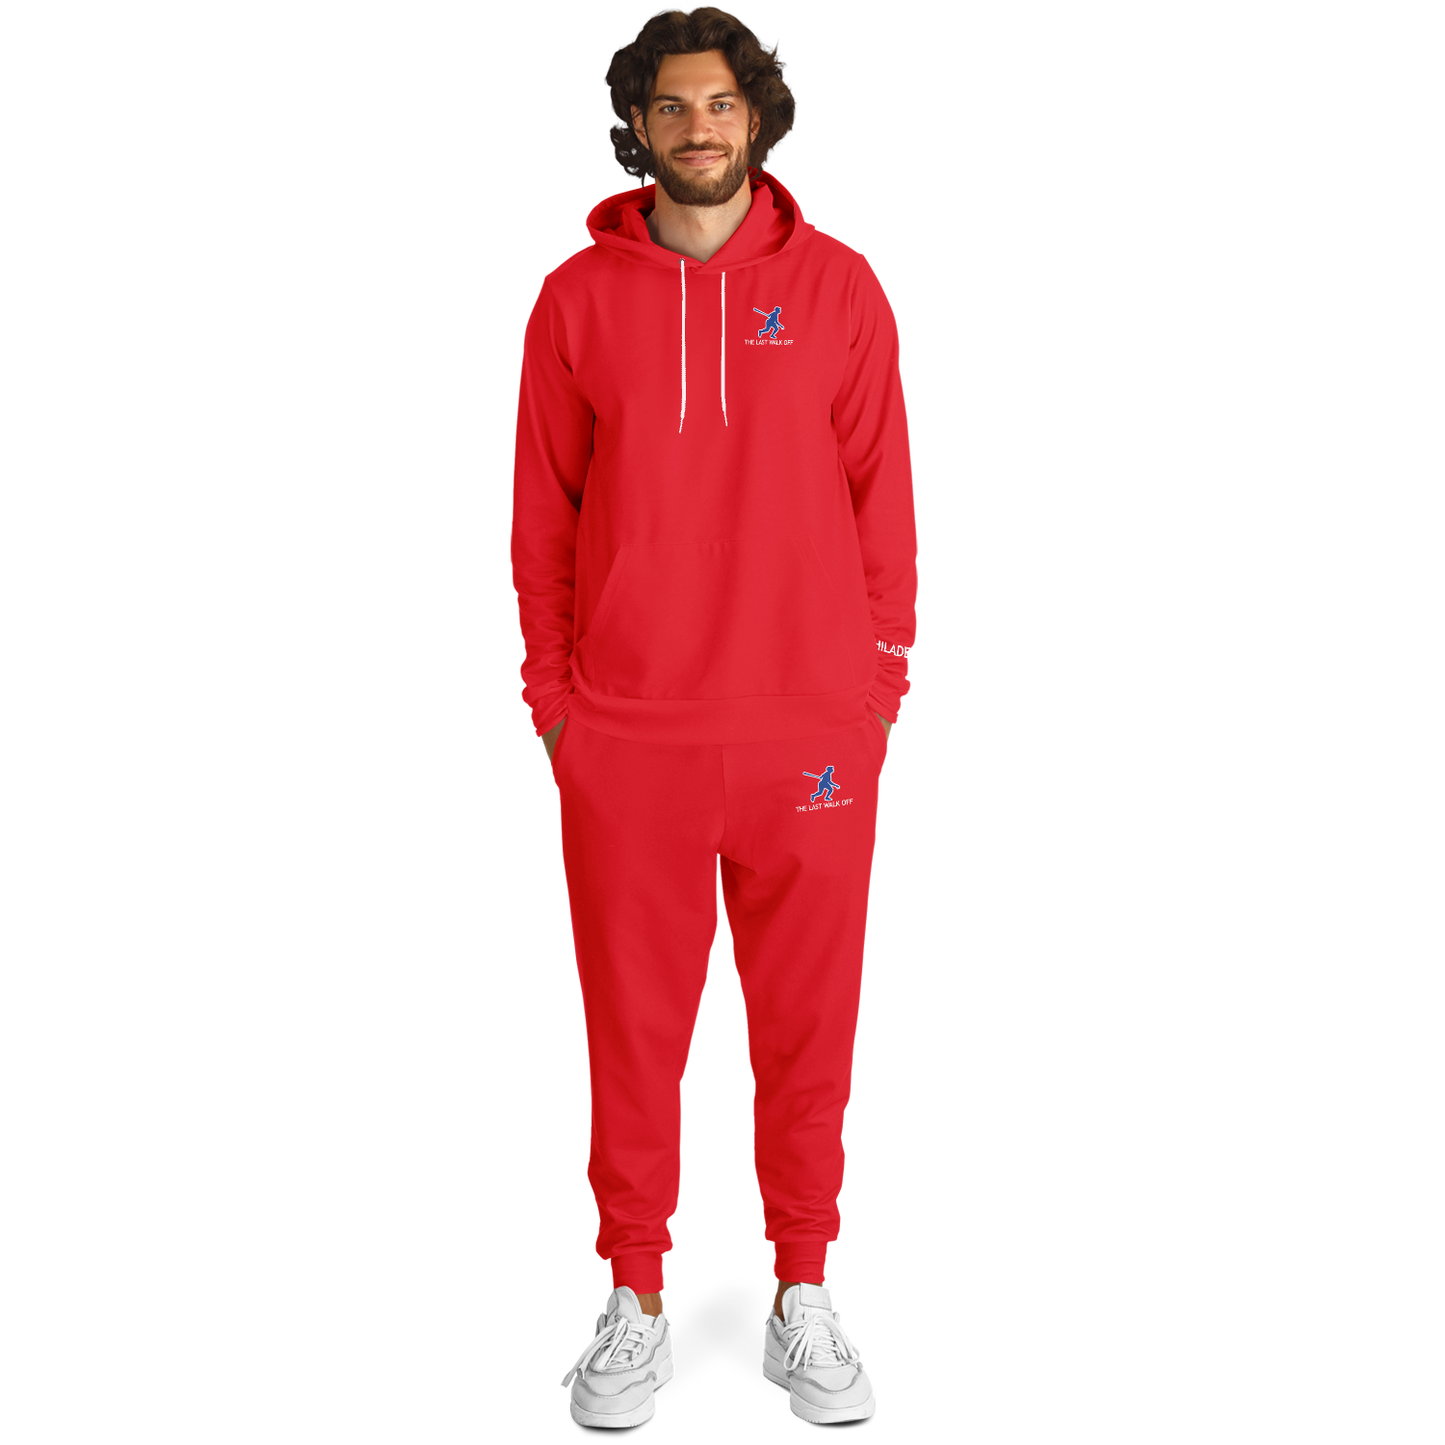 Philadelphia Red Hoodie and Joggers Liberty Bell